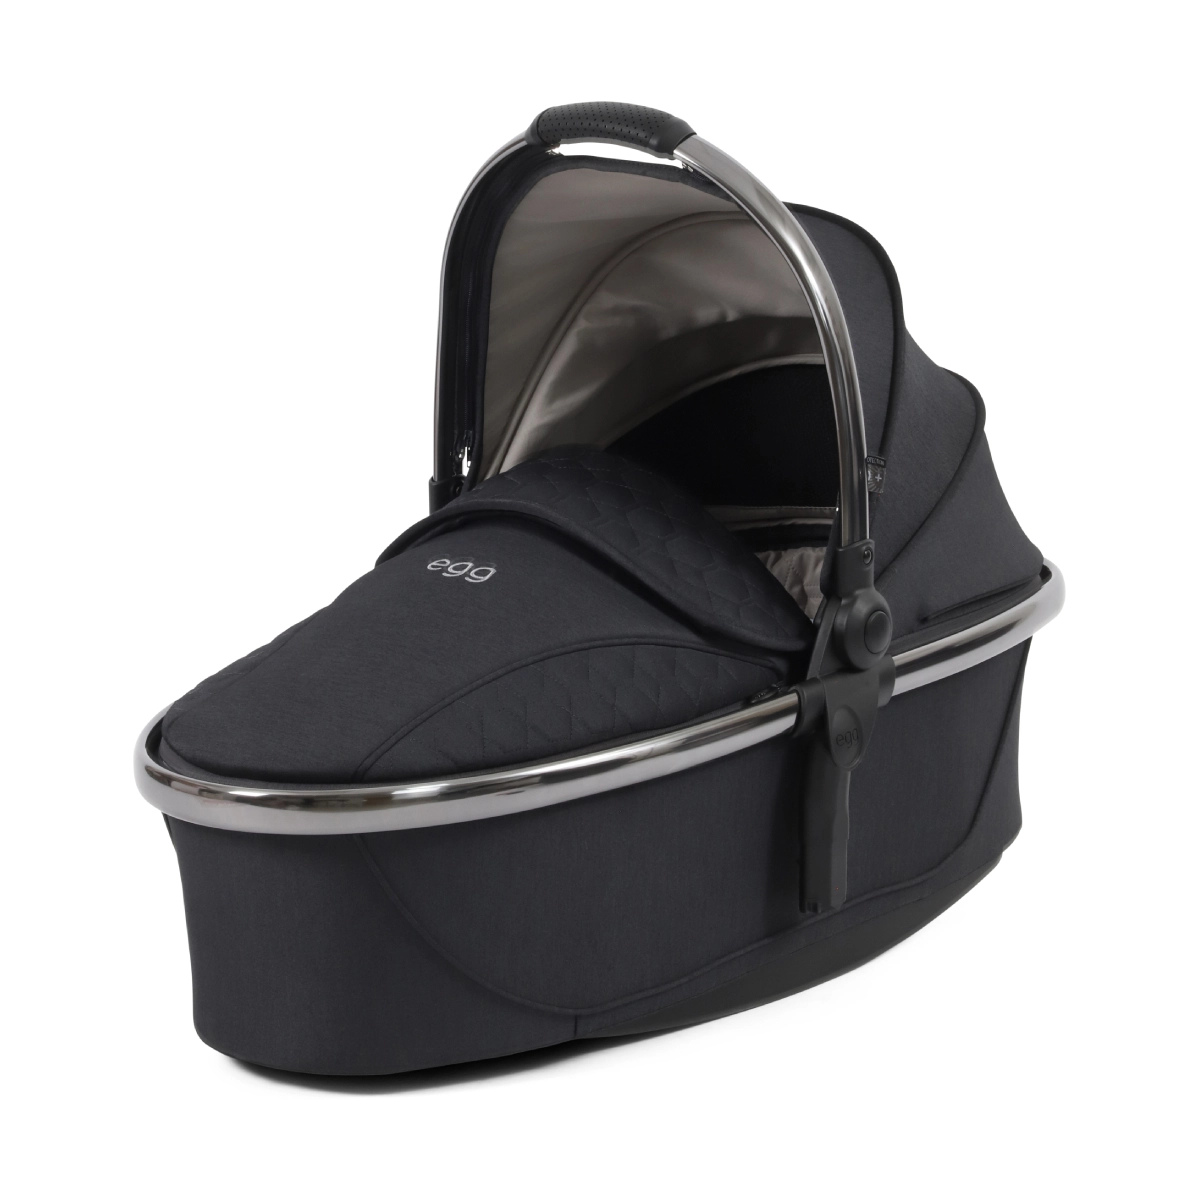 egg® 3 Carrycot